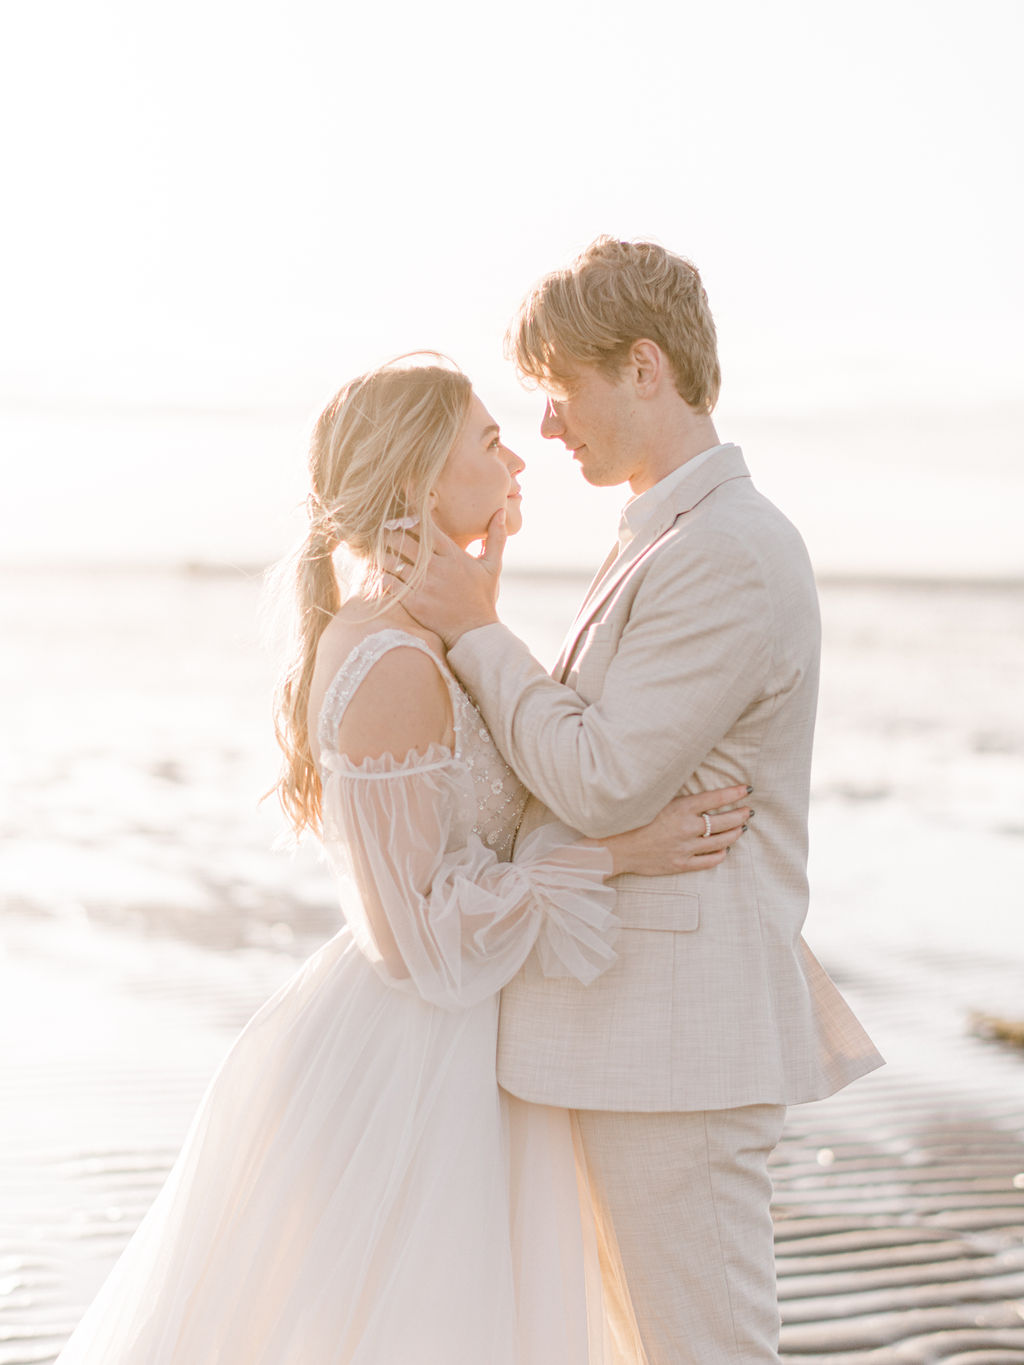 Romantic wedding portraits on the beach in Vancouver, British Columbia; Fine art wedding inspiration for an intimate beach wedding, light and airy wedding portraits